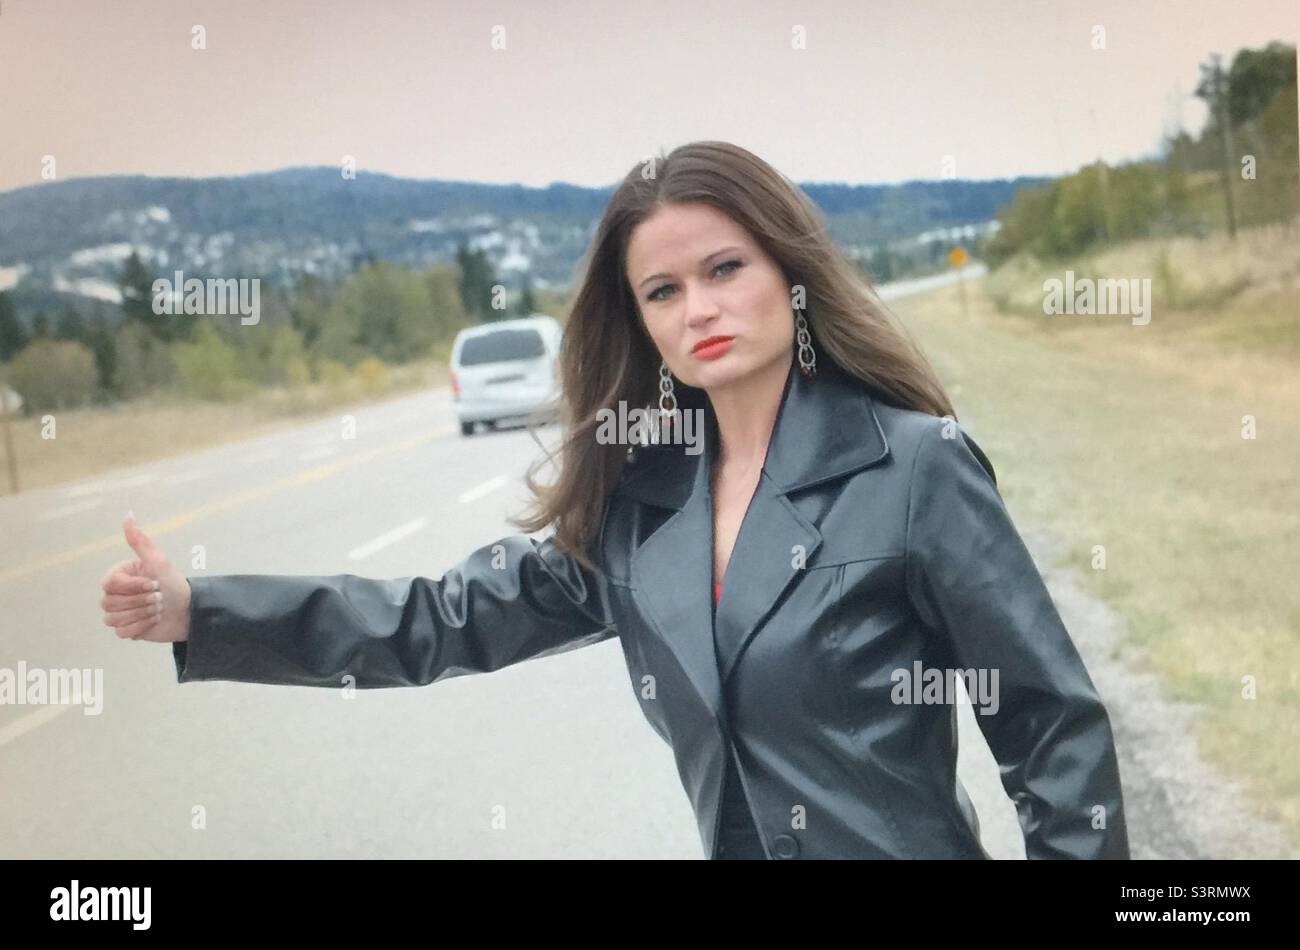 Hitch hiker, woman, pretty girl, Windy day,  brunette, thumbing a ride, thumbs up, flowing hair, road, need a ride Stock Photo